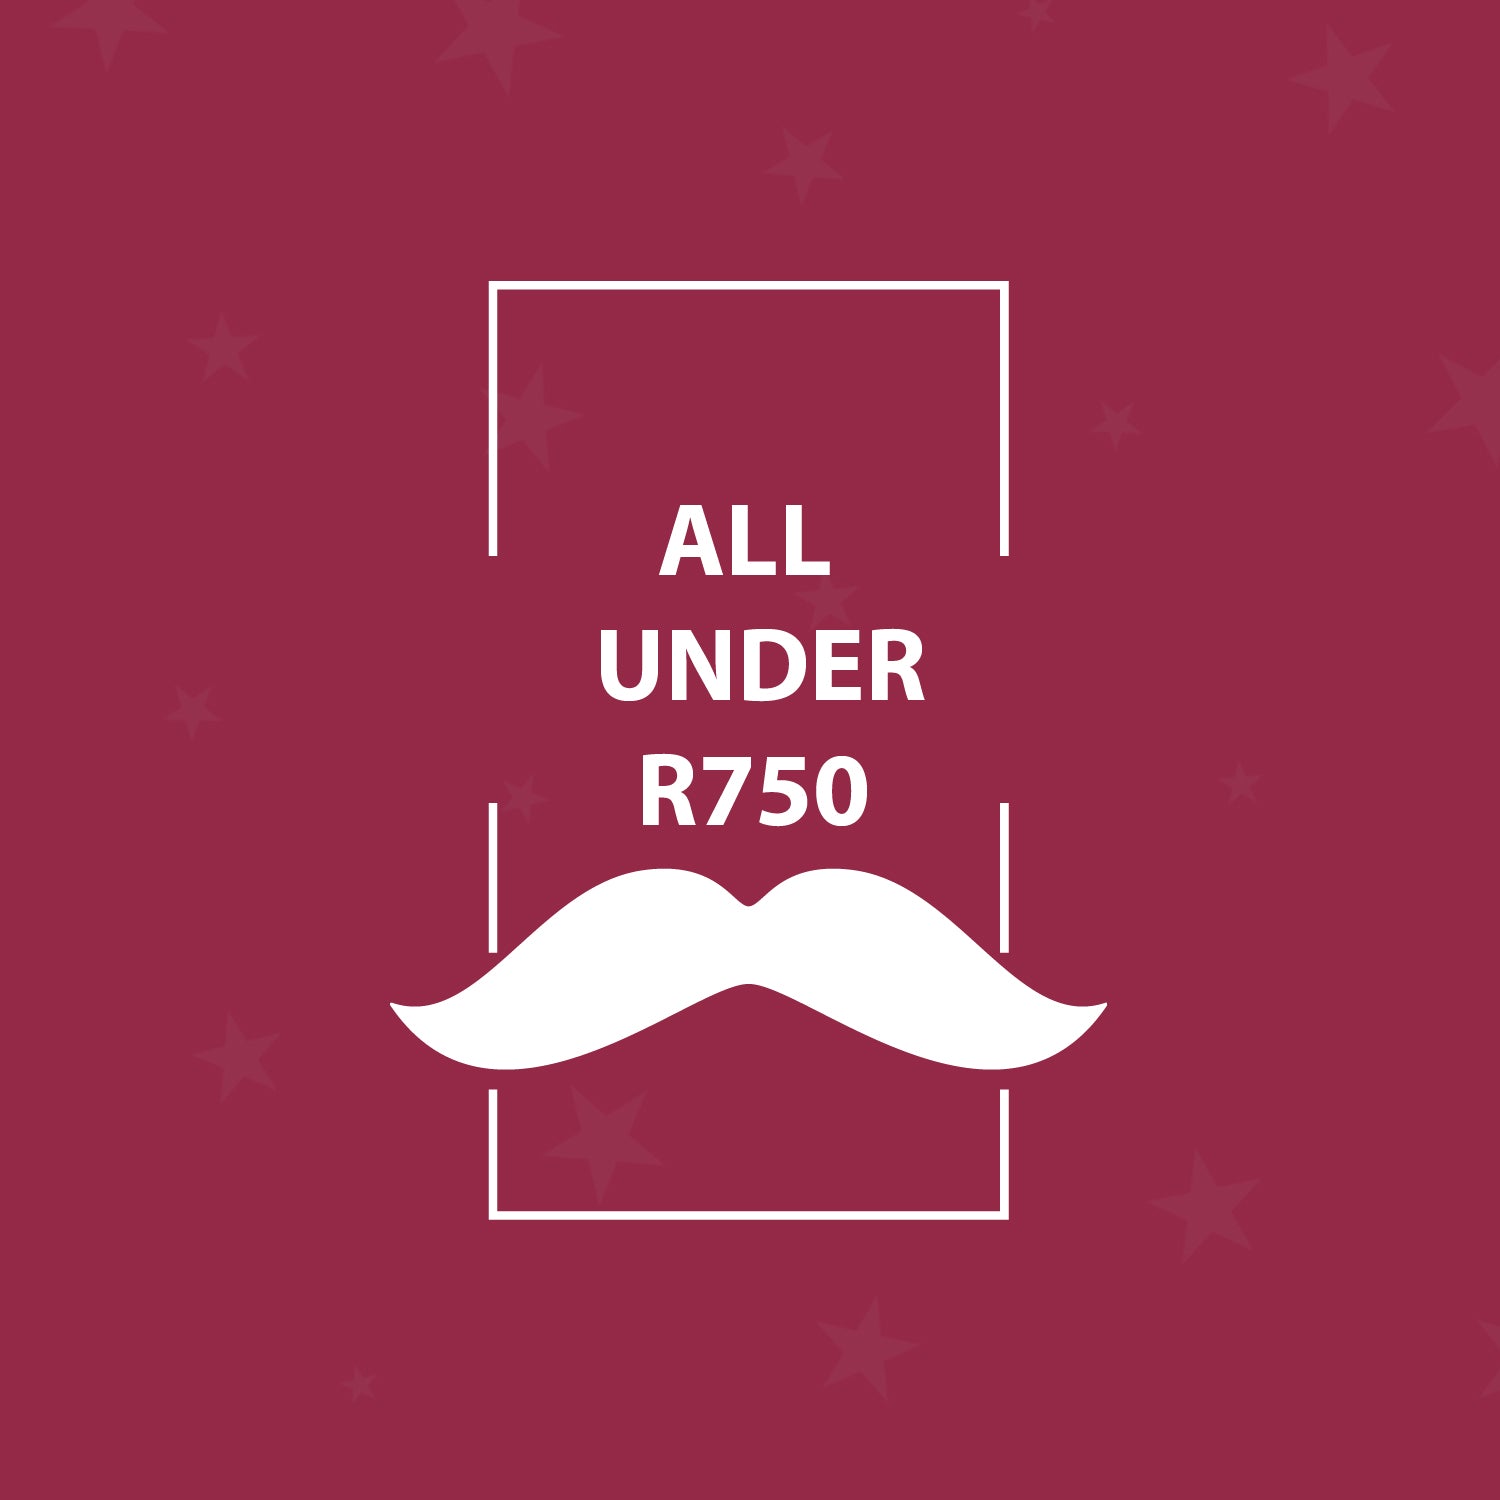 Fathers Day Gifts Under R750